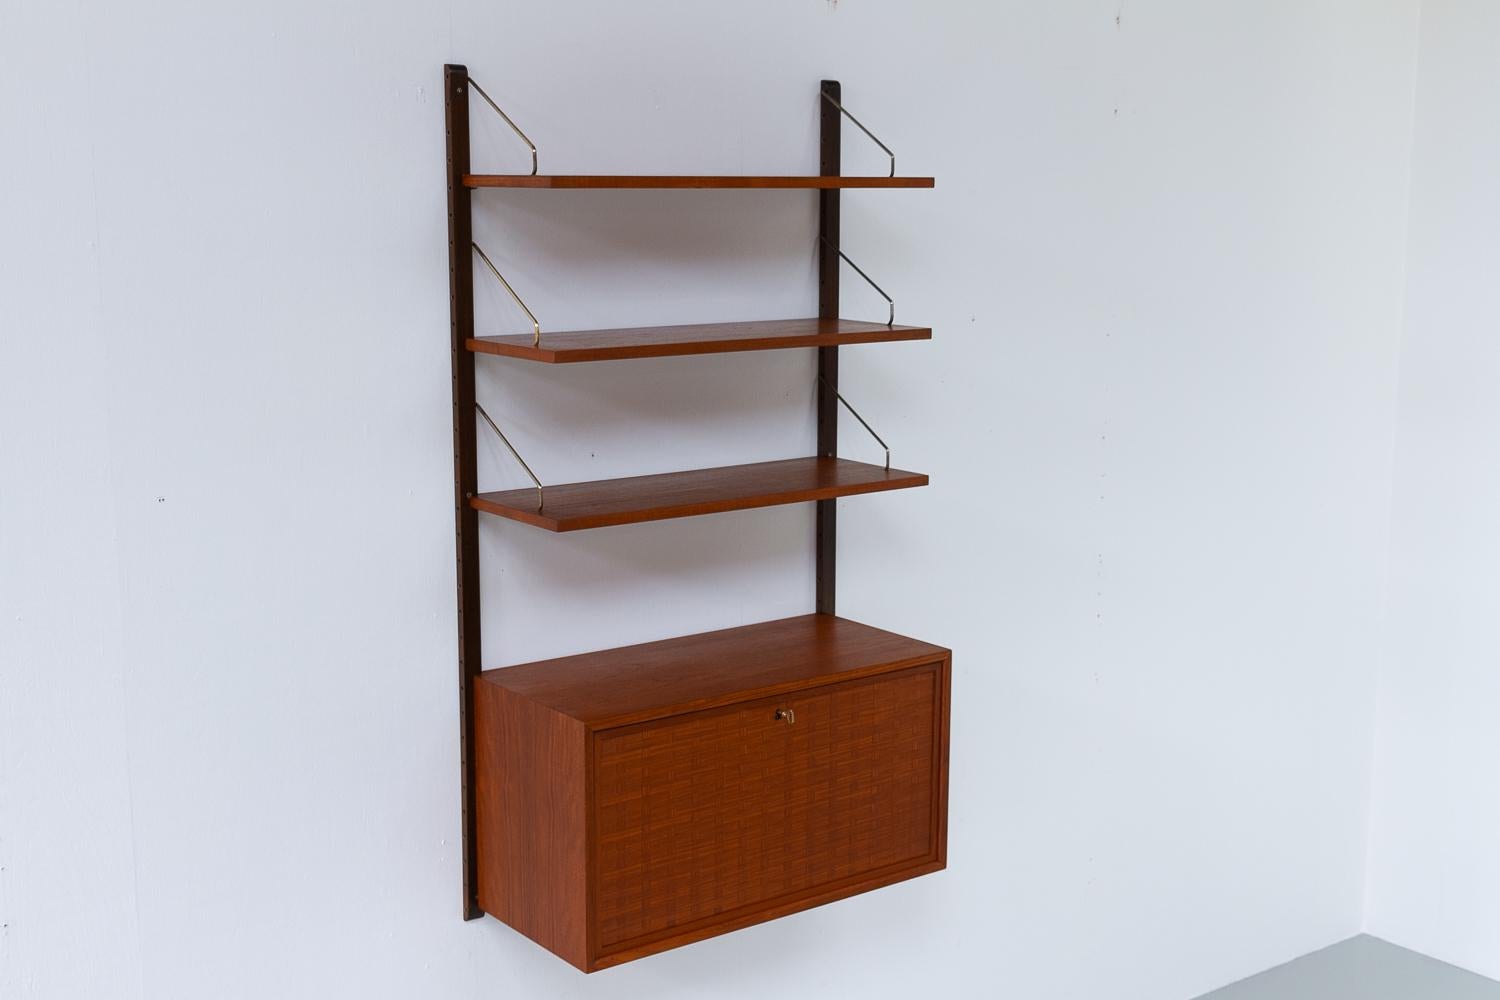 Danish Modern 1-Bay Modular Teak Wall Unit by Poul Cadovius for Cado, 1960s.

Mid-Century Modern 1 bay shelving system model Royal. This is an original vintage floating bookcase designed in 1948 by Danish architect Poul Cadovius. 
Cadovius had the